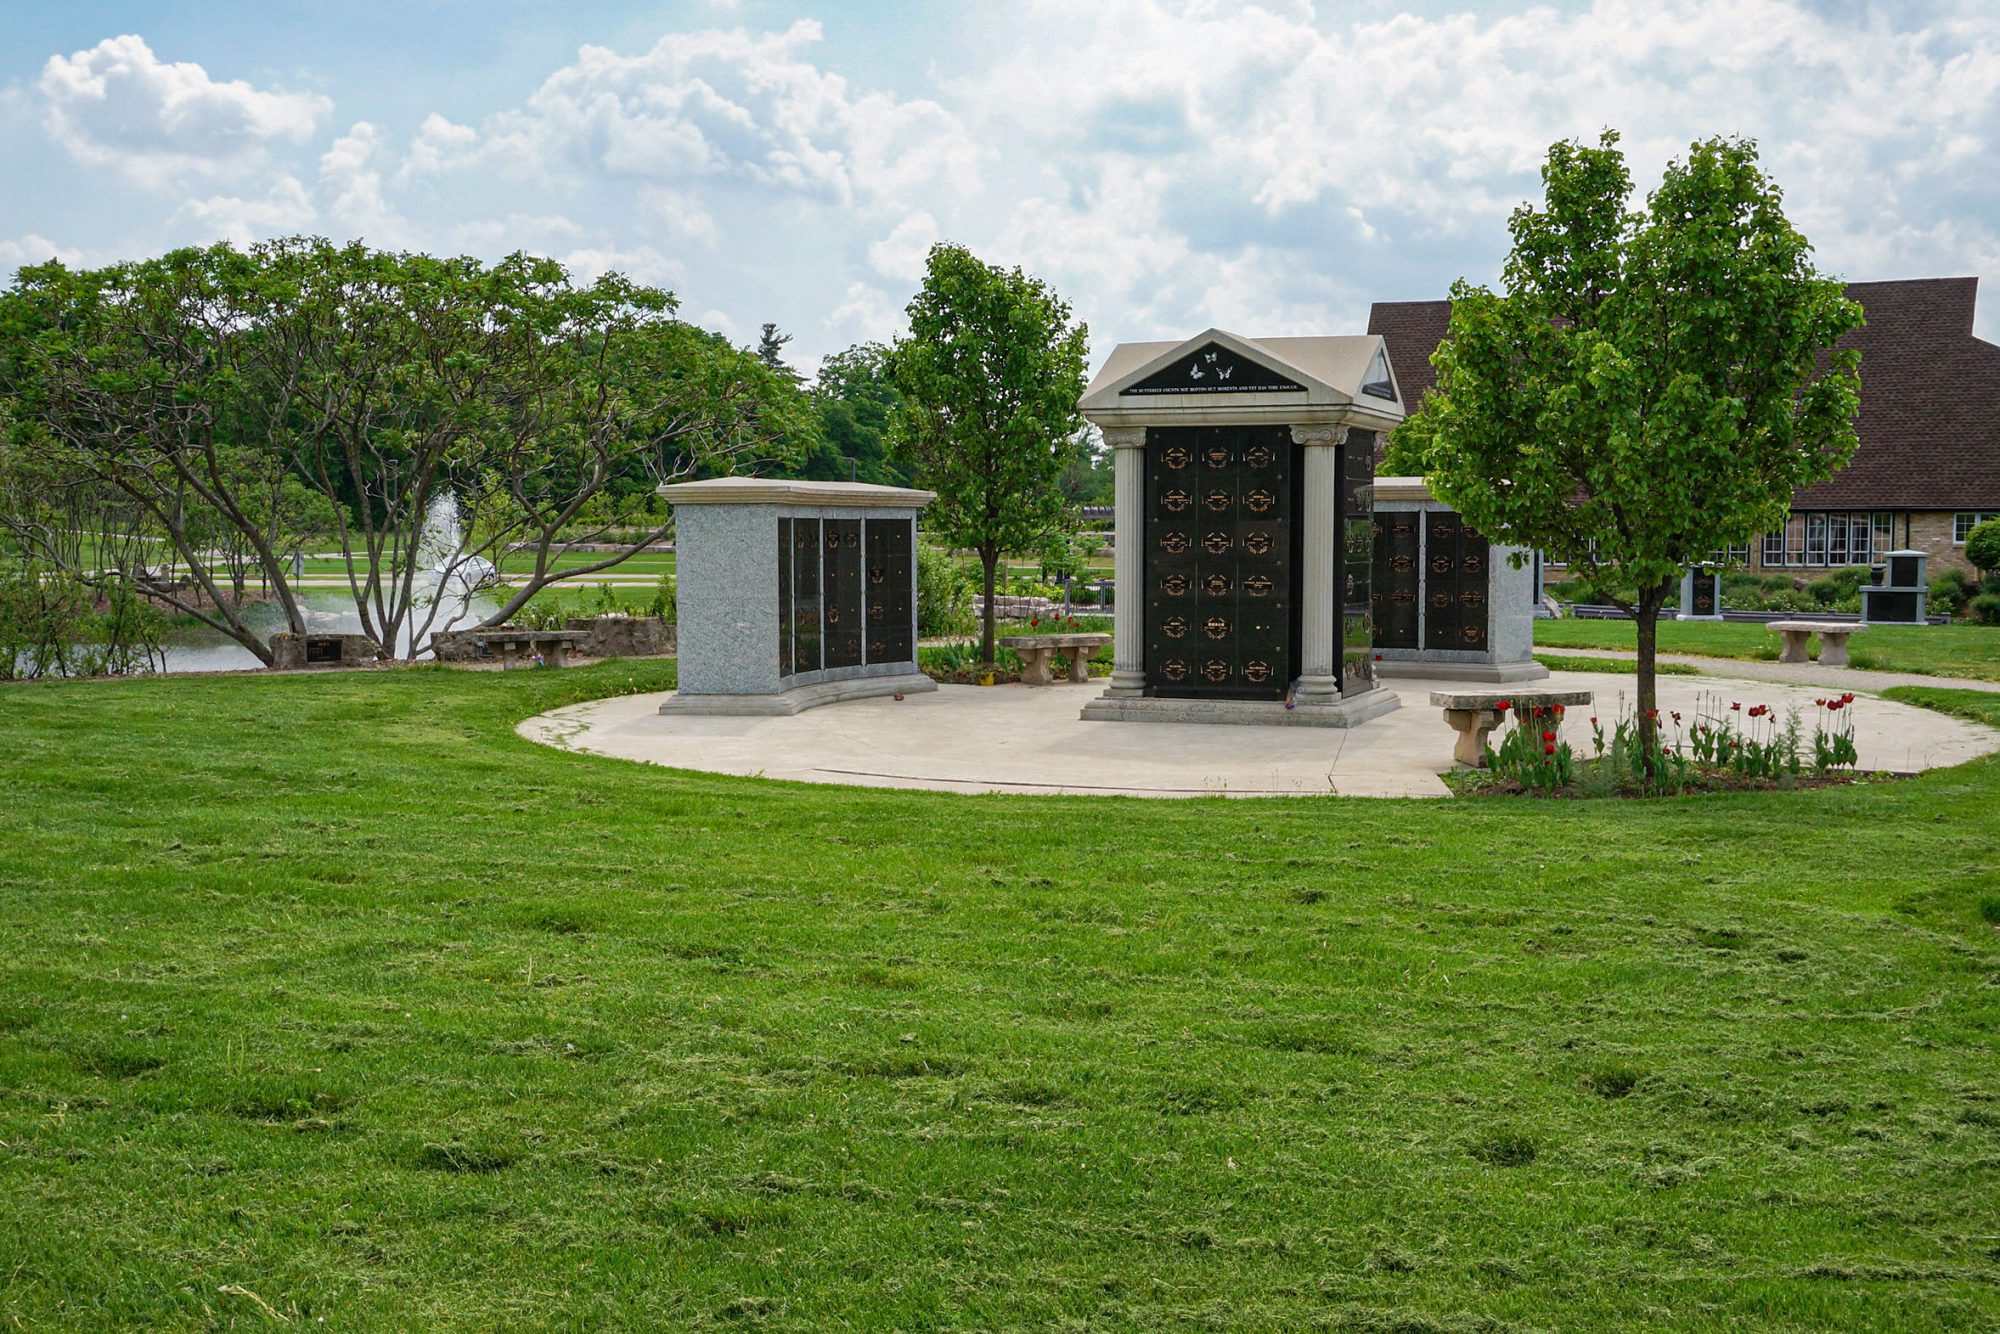 A series of columbaria structures with concrete seating in front of a church